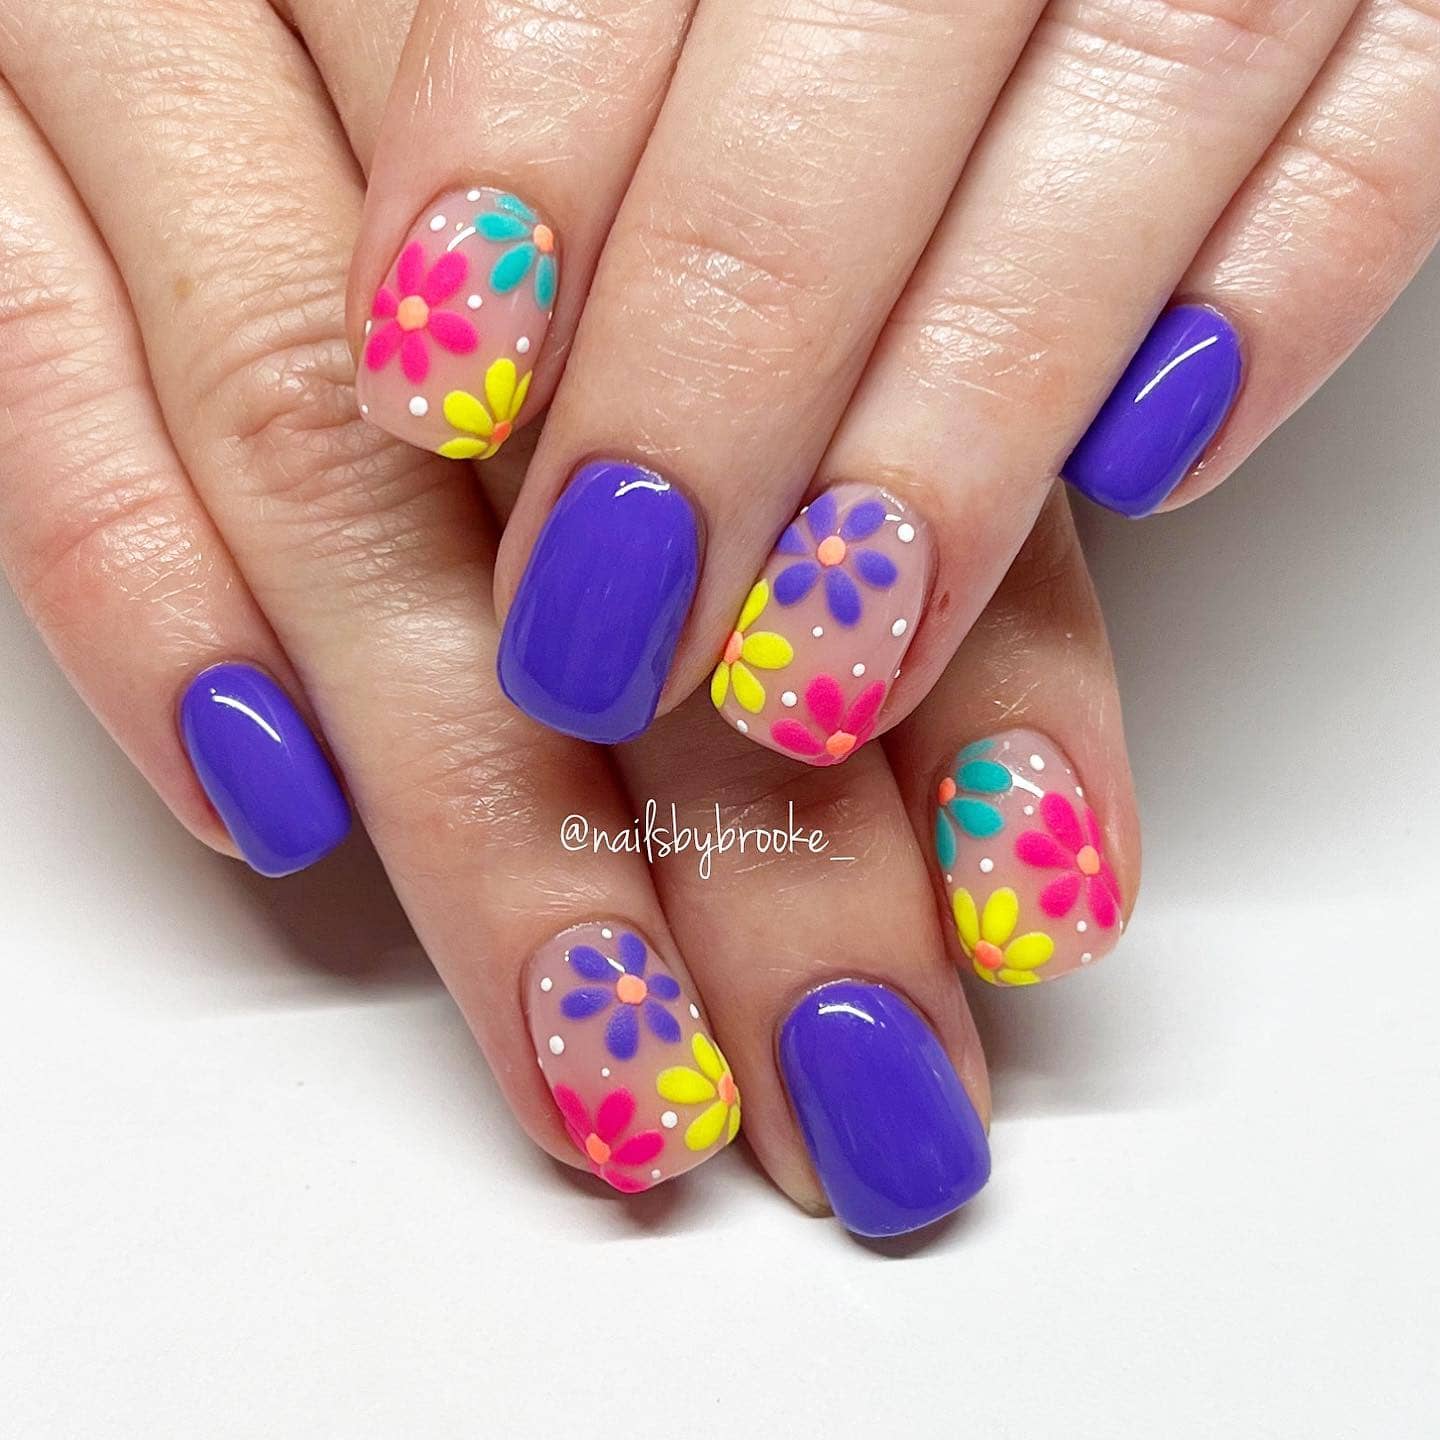 Over 100 Bright Summer Nail Art Designs That Will Be So Trendy - Rose idea